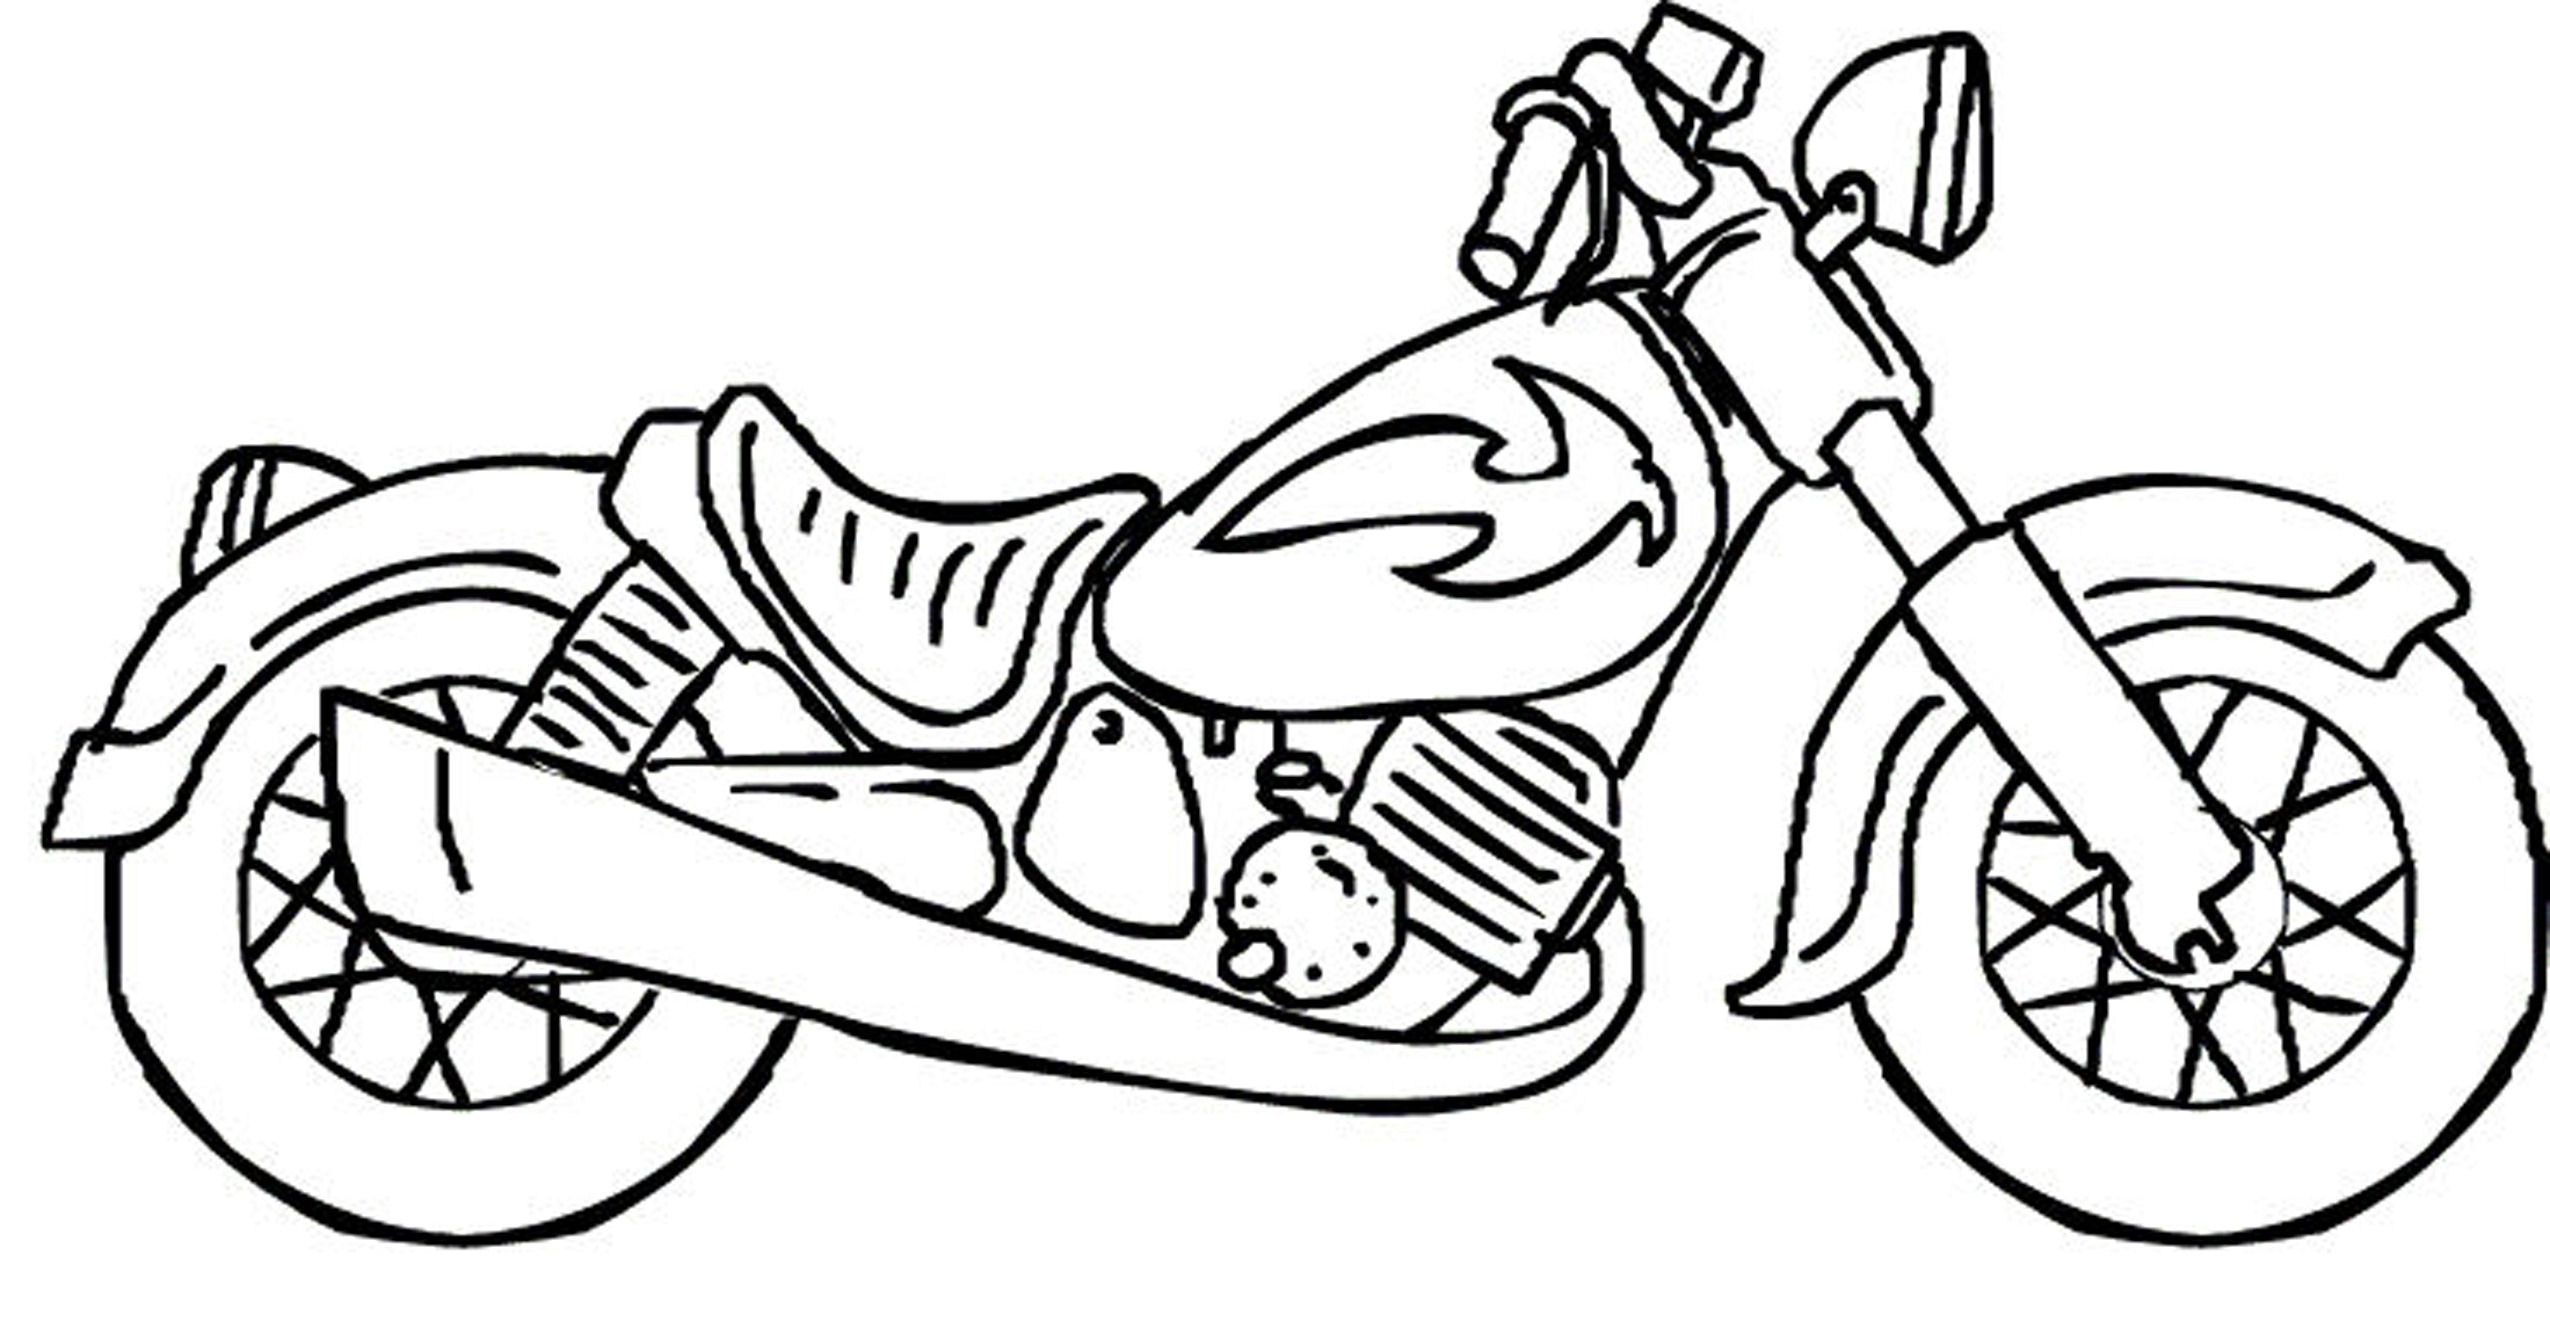 Motorcycle coloring pages coloring pages phenomenal motorcycle coloring pages motorcycle